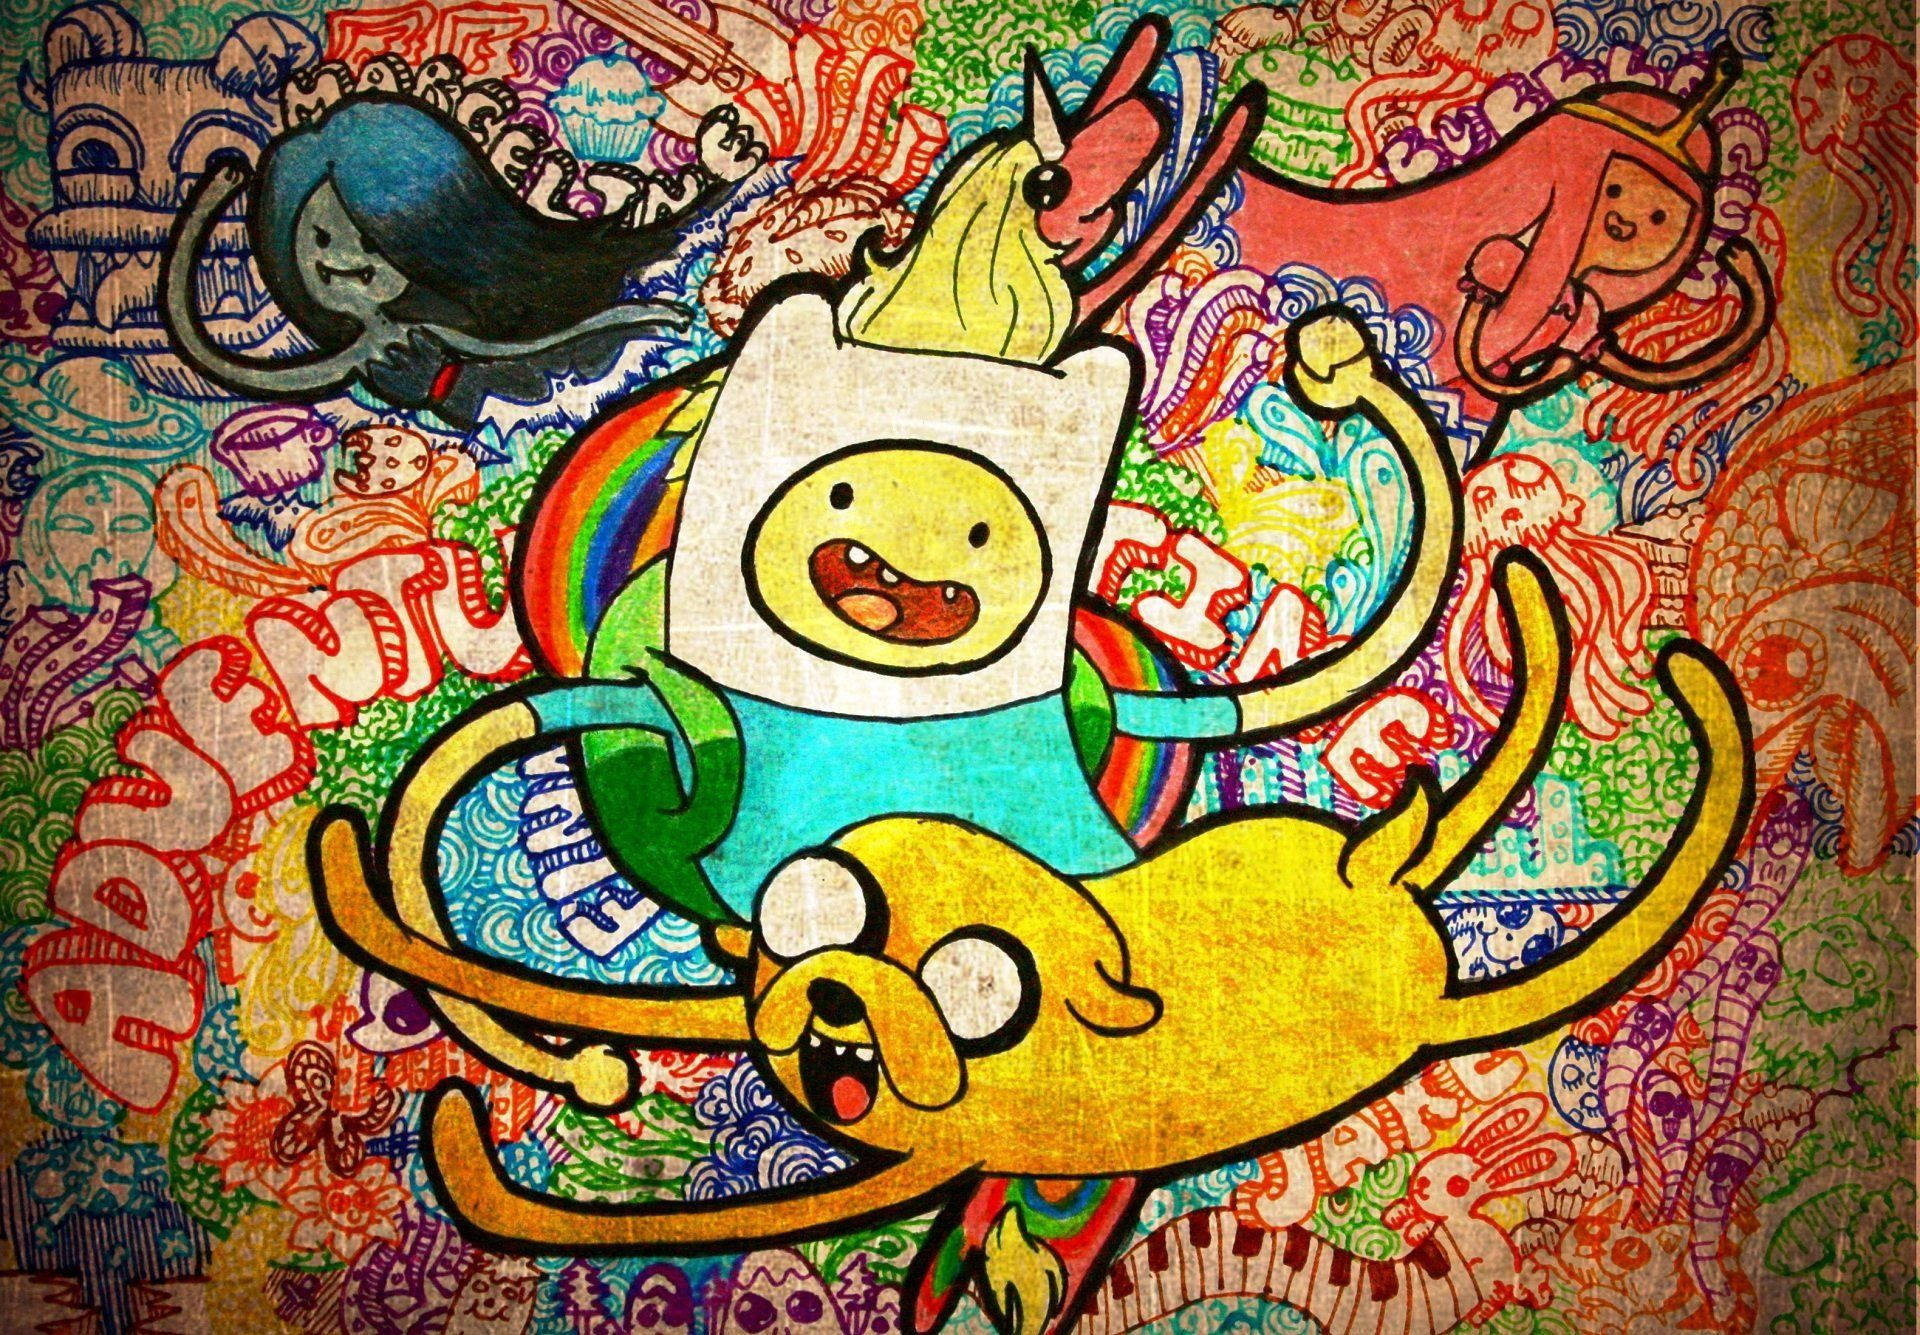 Adventure Time Wallpapers